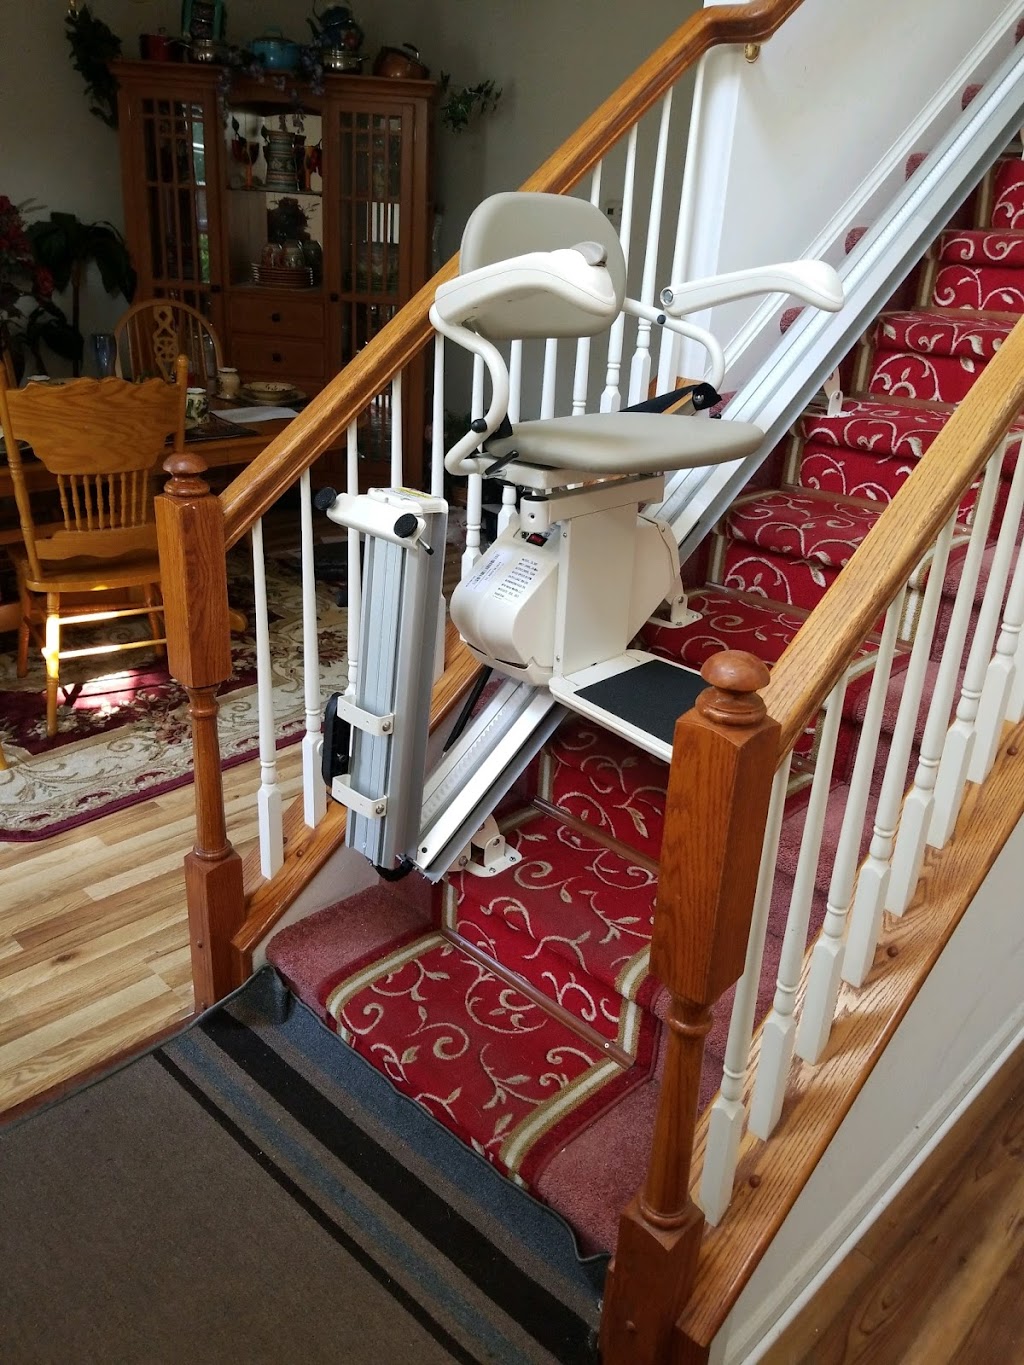 Power Stair Lifts | 2700 William Penn Hwy, Easton, PA 18045 | Phone: (484) 895-1188